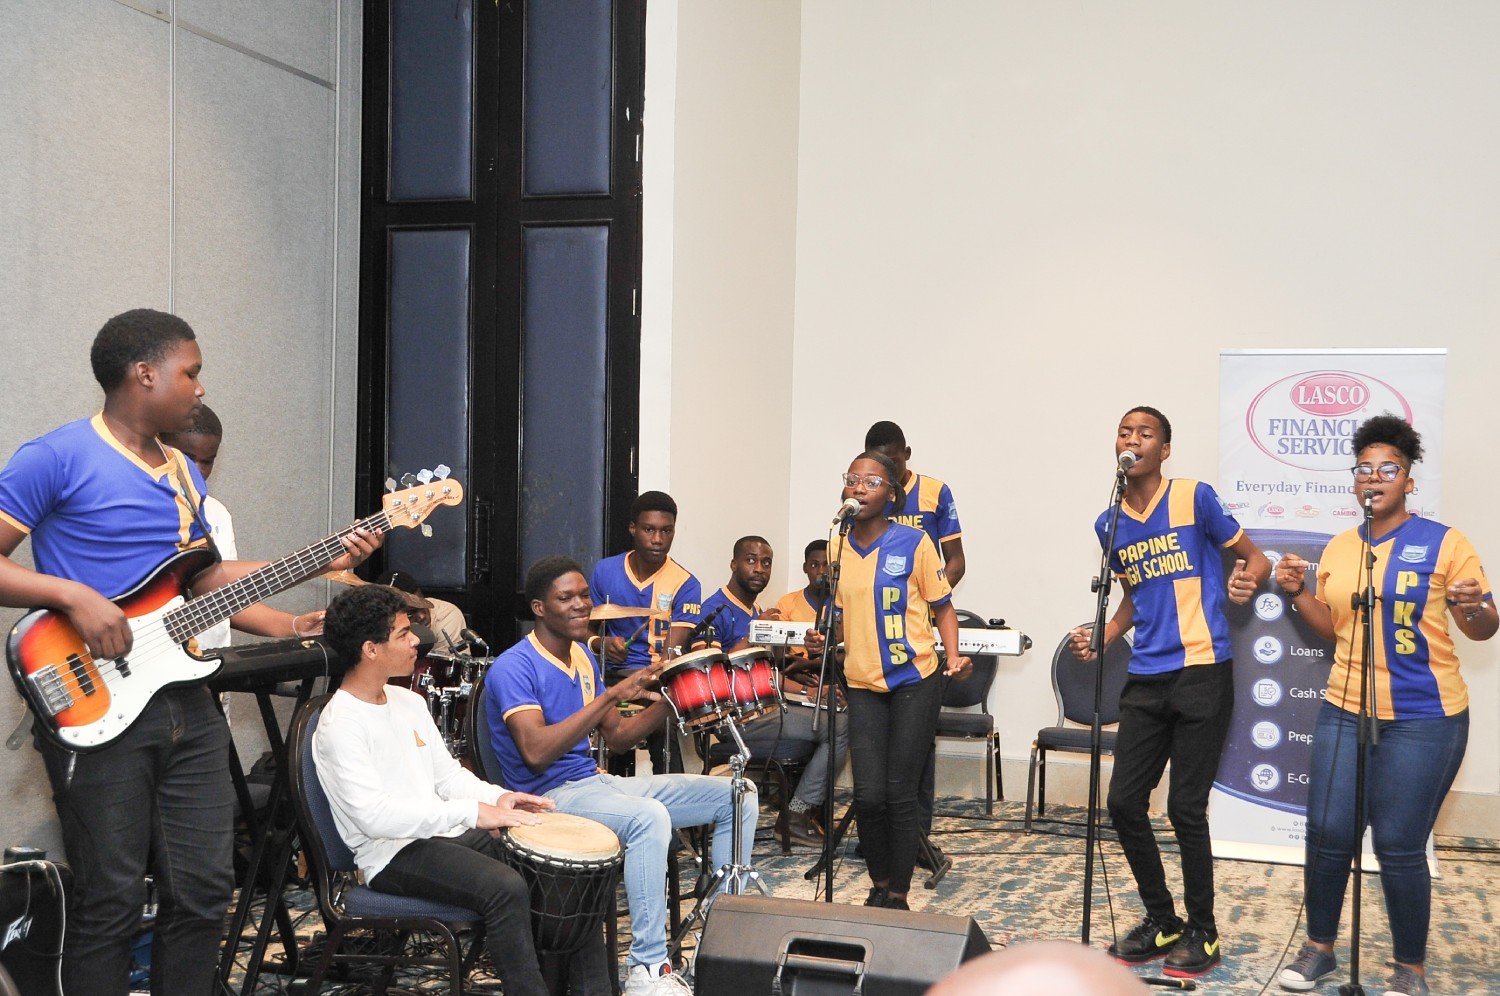 Performance by Papine High School Band